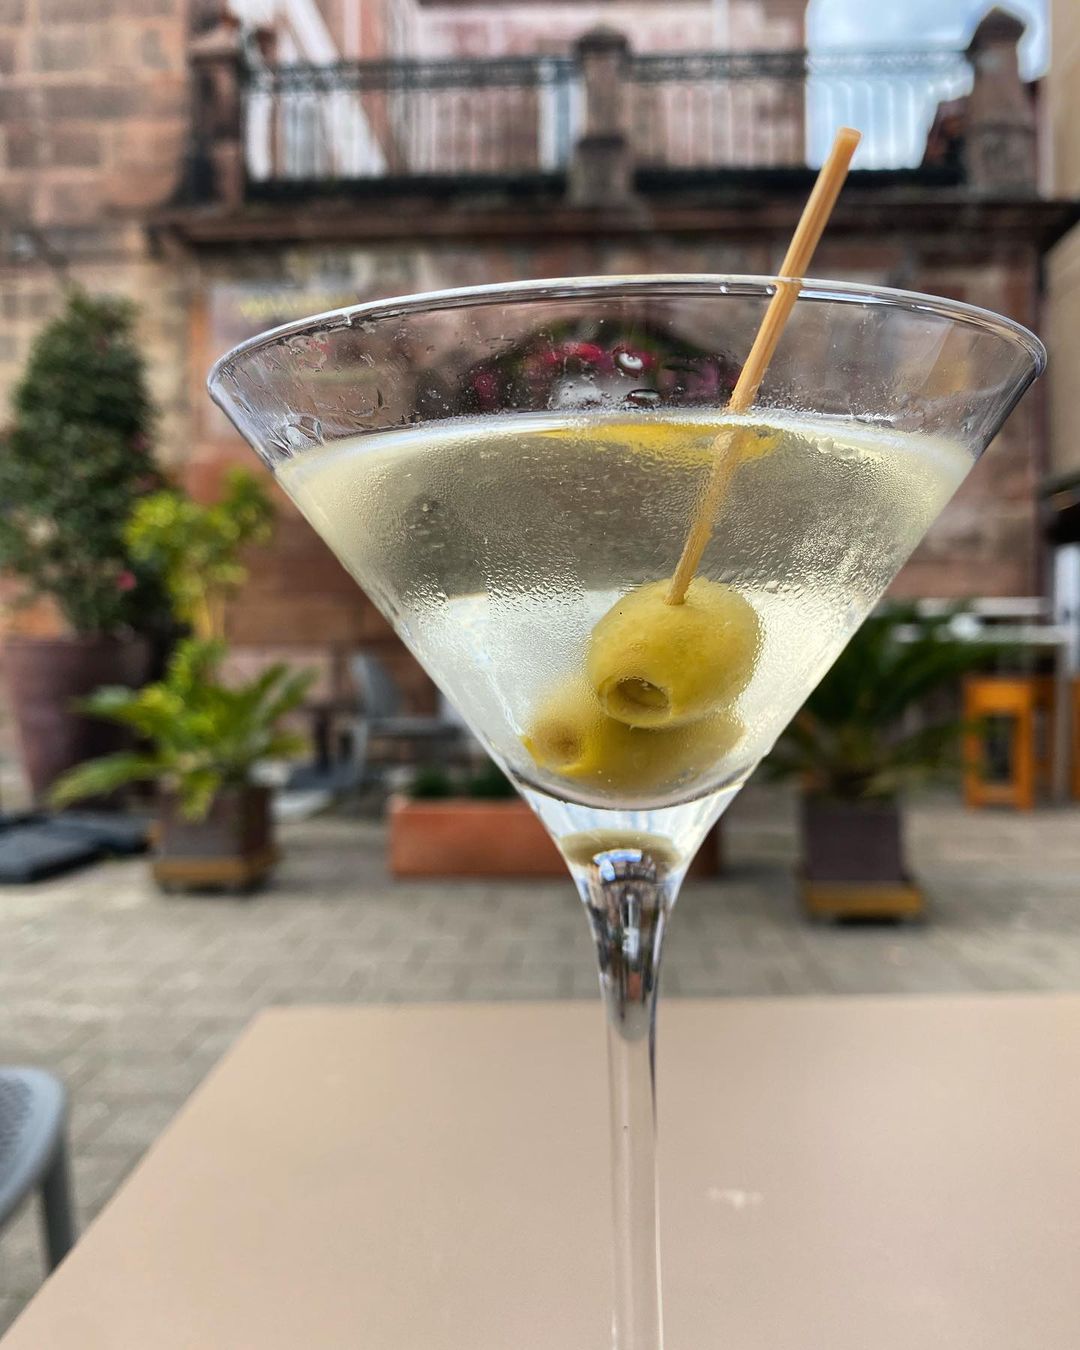 Here's What a Martini Should Look Like - Clear Liquid With an olive in it!